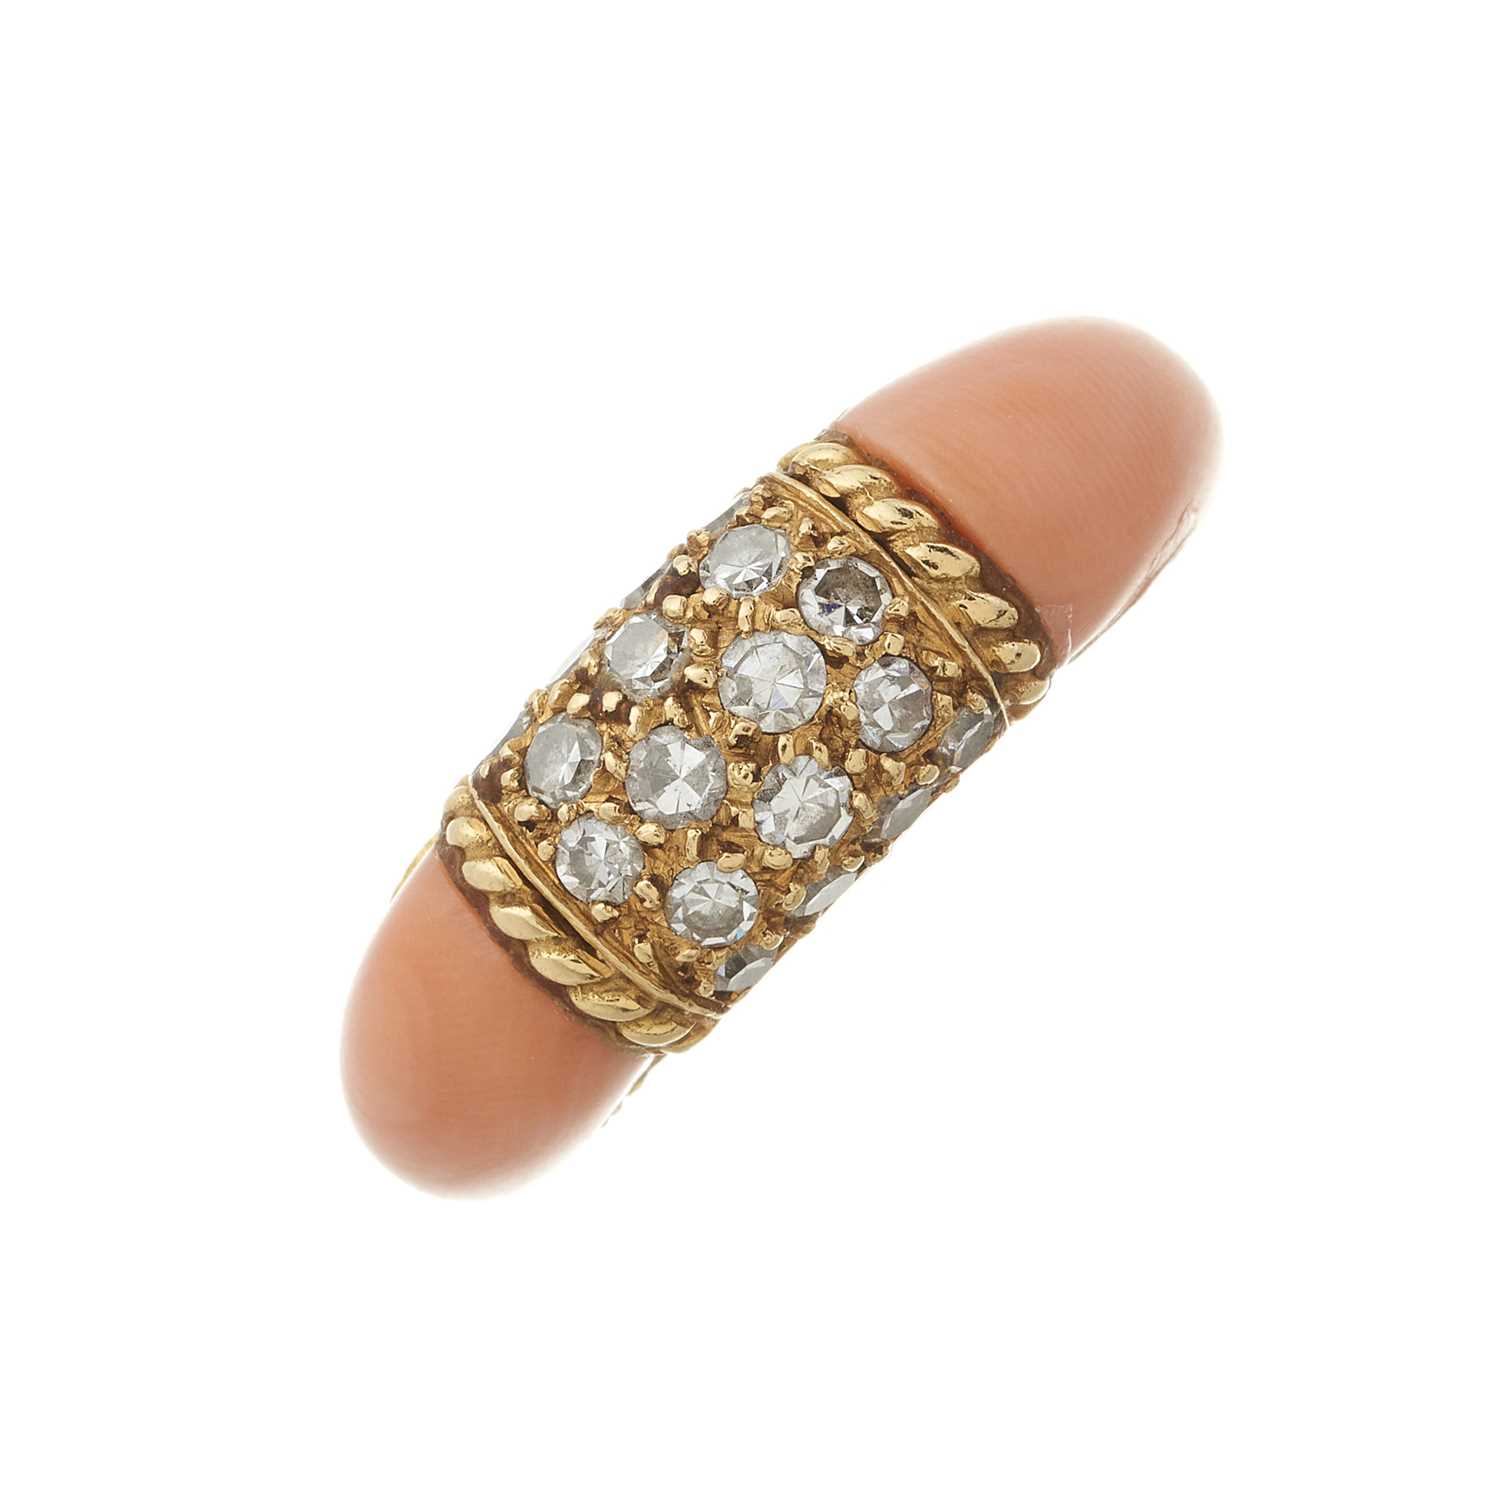 Van Cleef & Arpels, a vintage 18ct gold coral and diamond Philippine ring